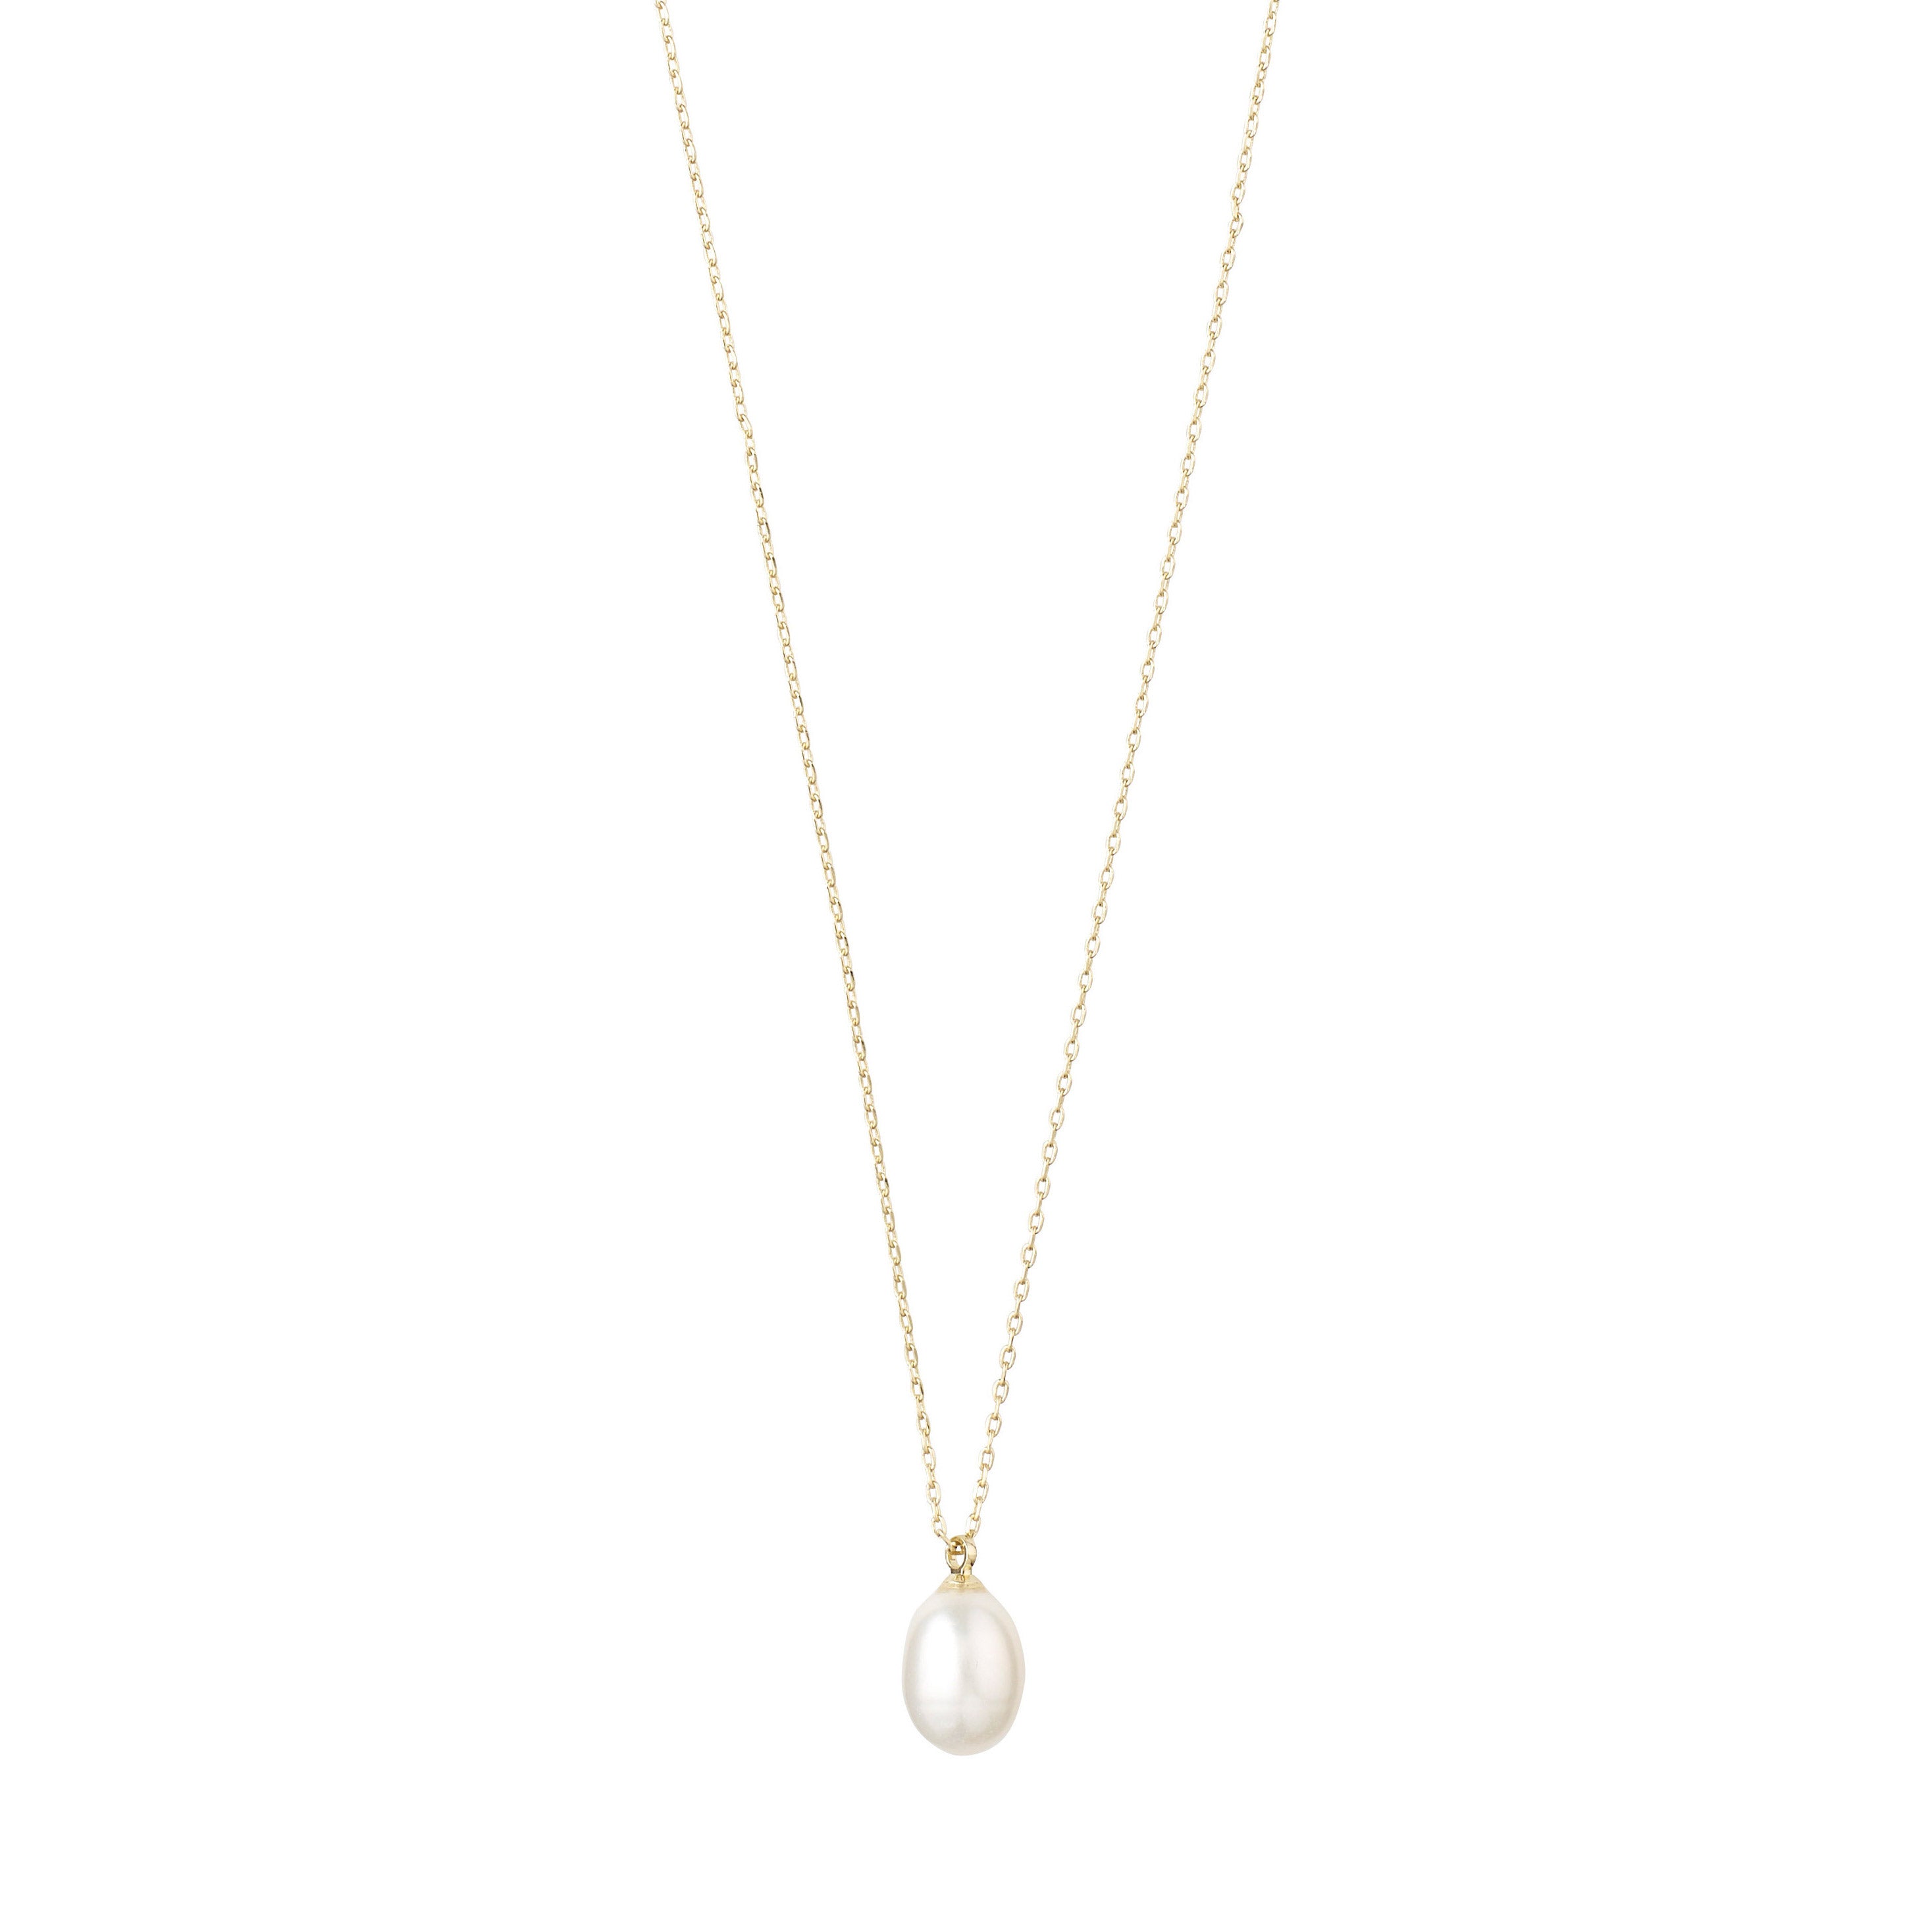 EILA freshwater pearl necklace gold-plated